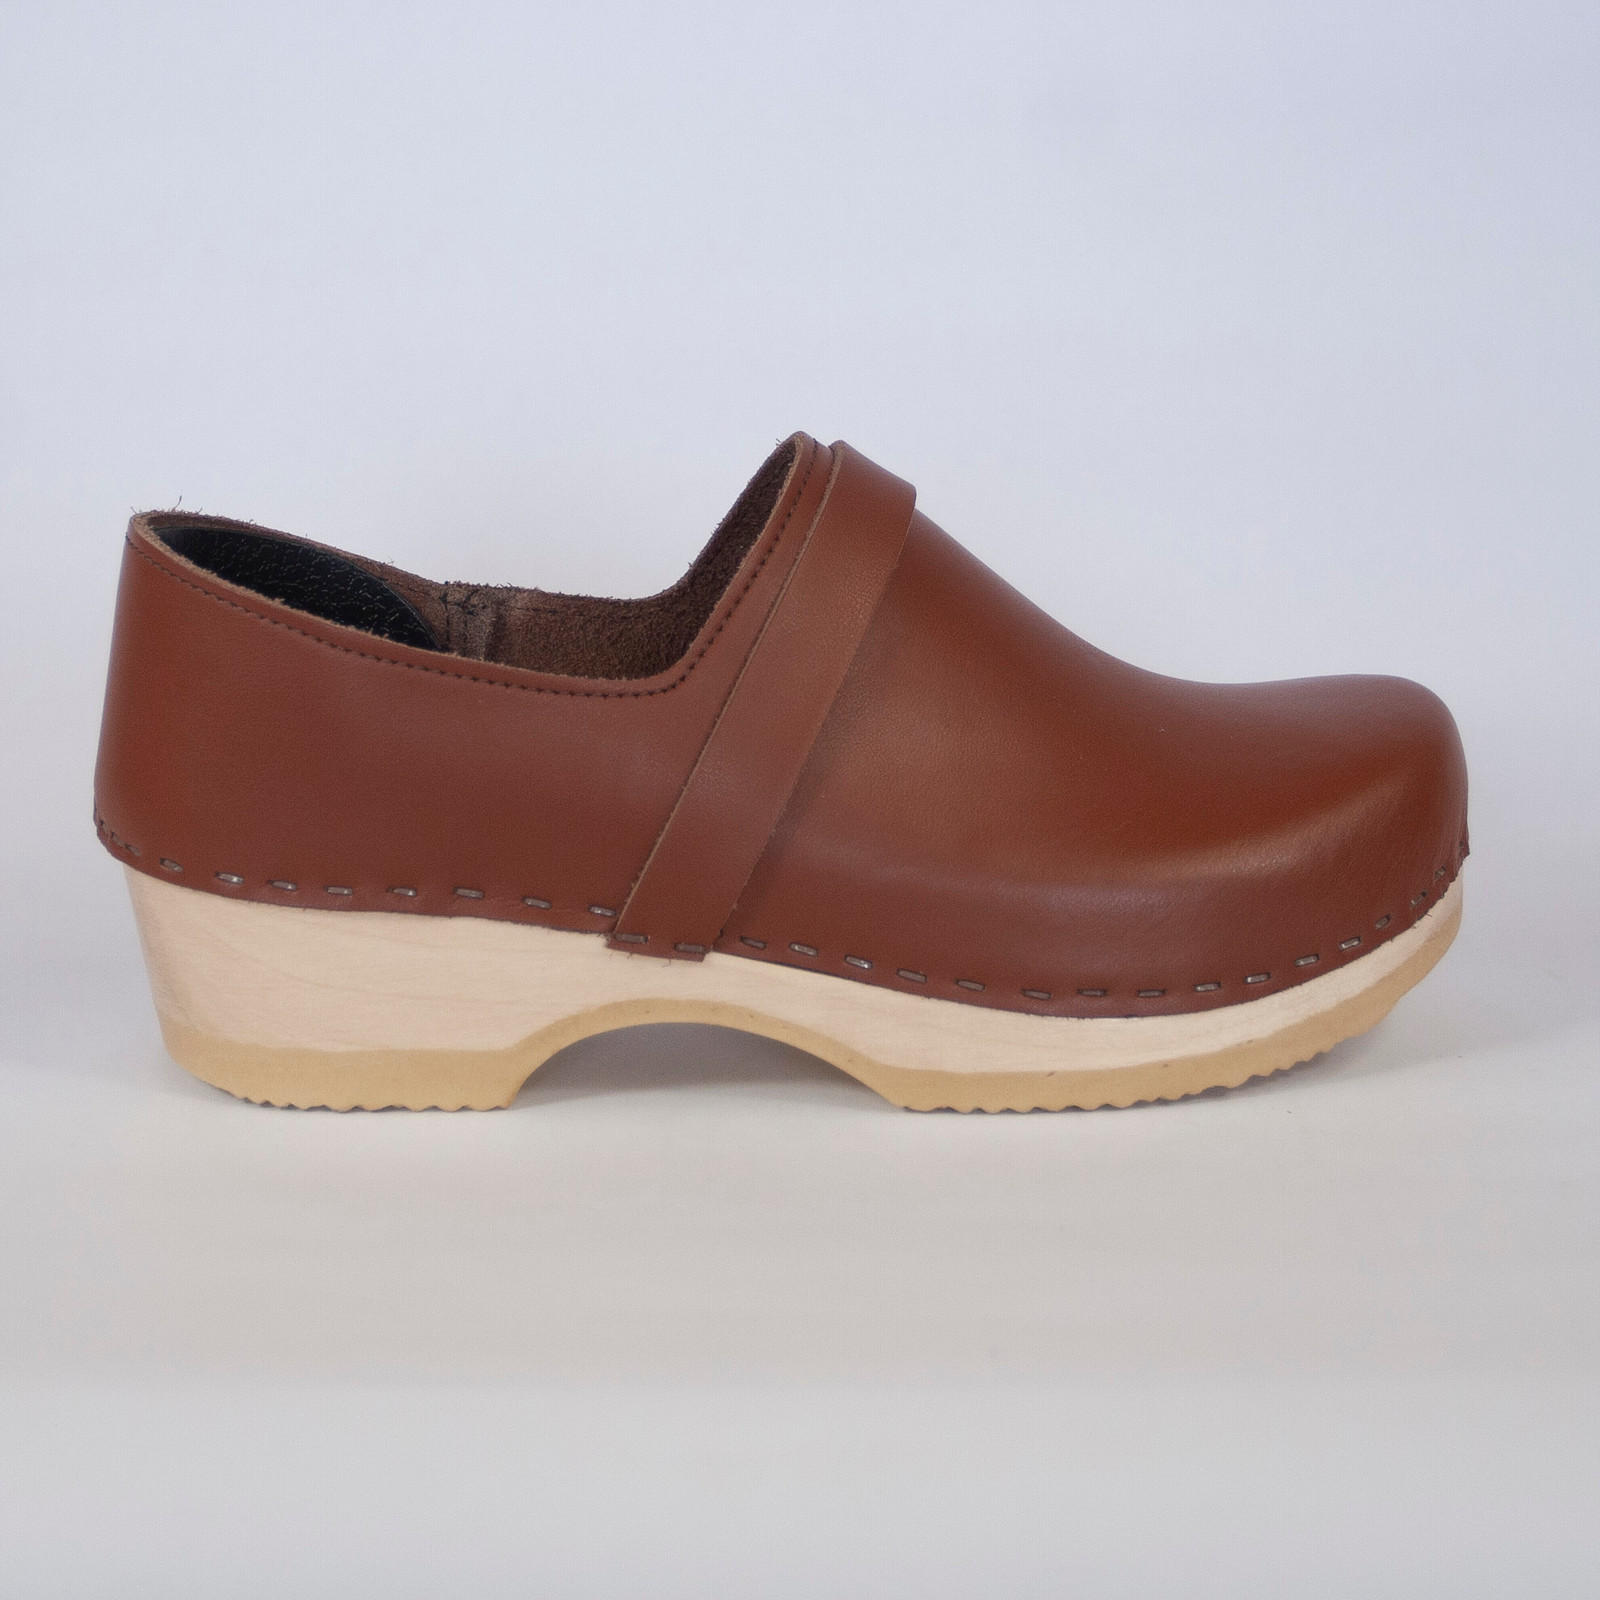 Closed Back Clogs - With Strap 